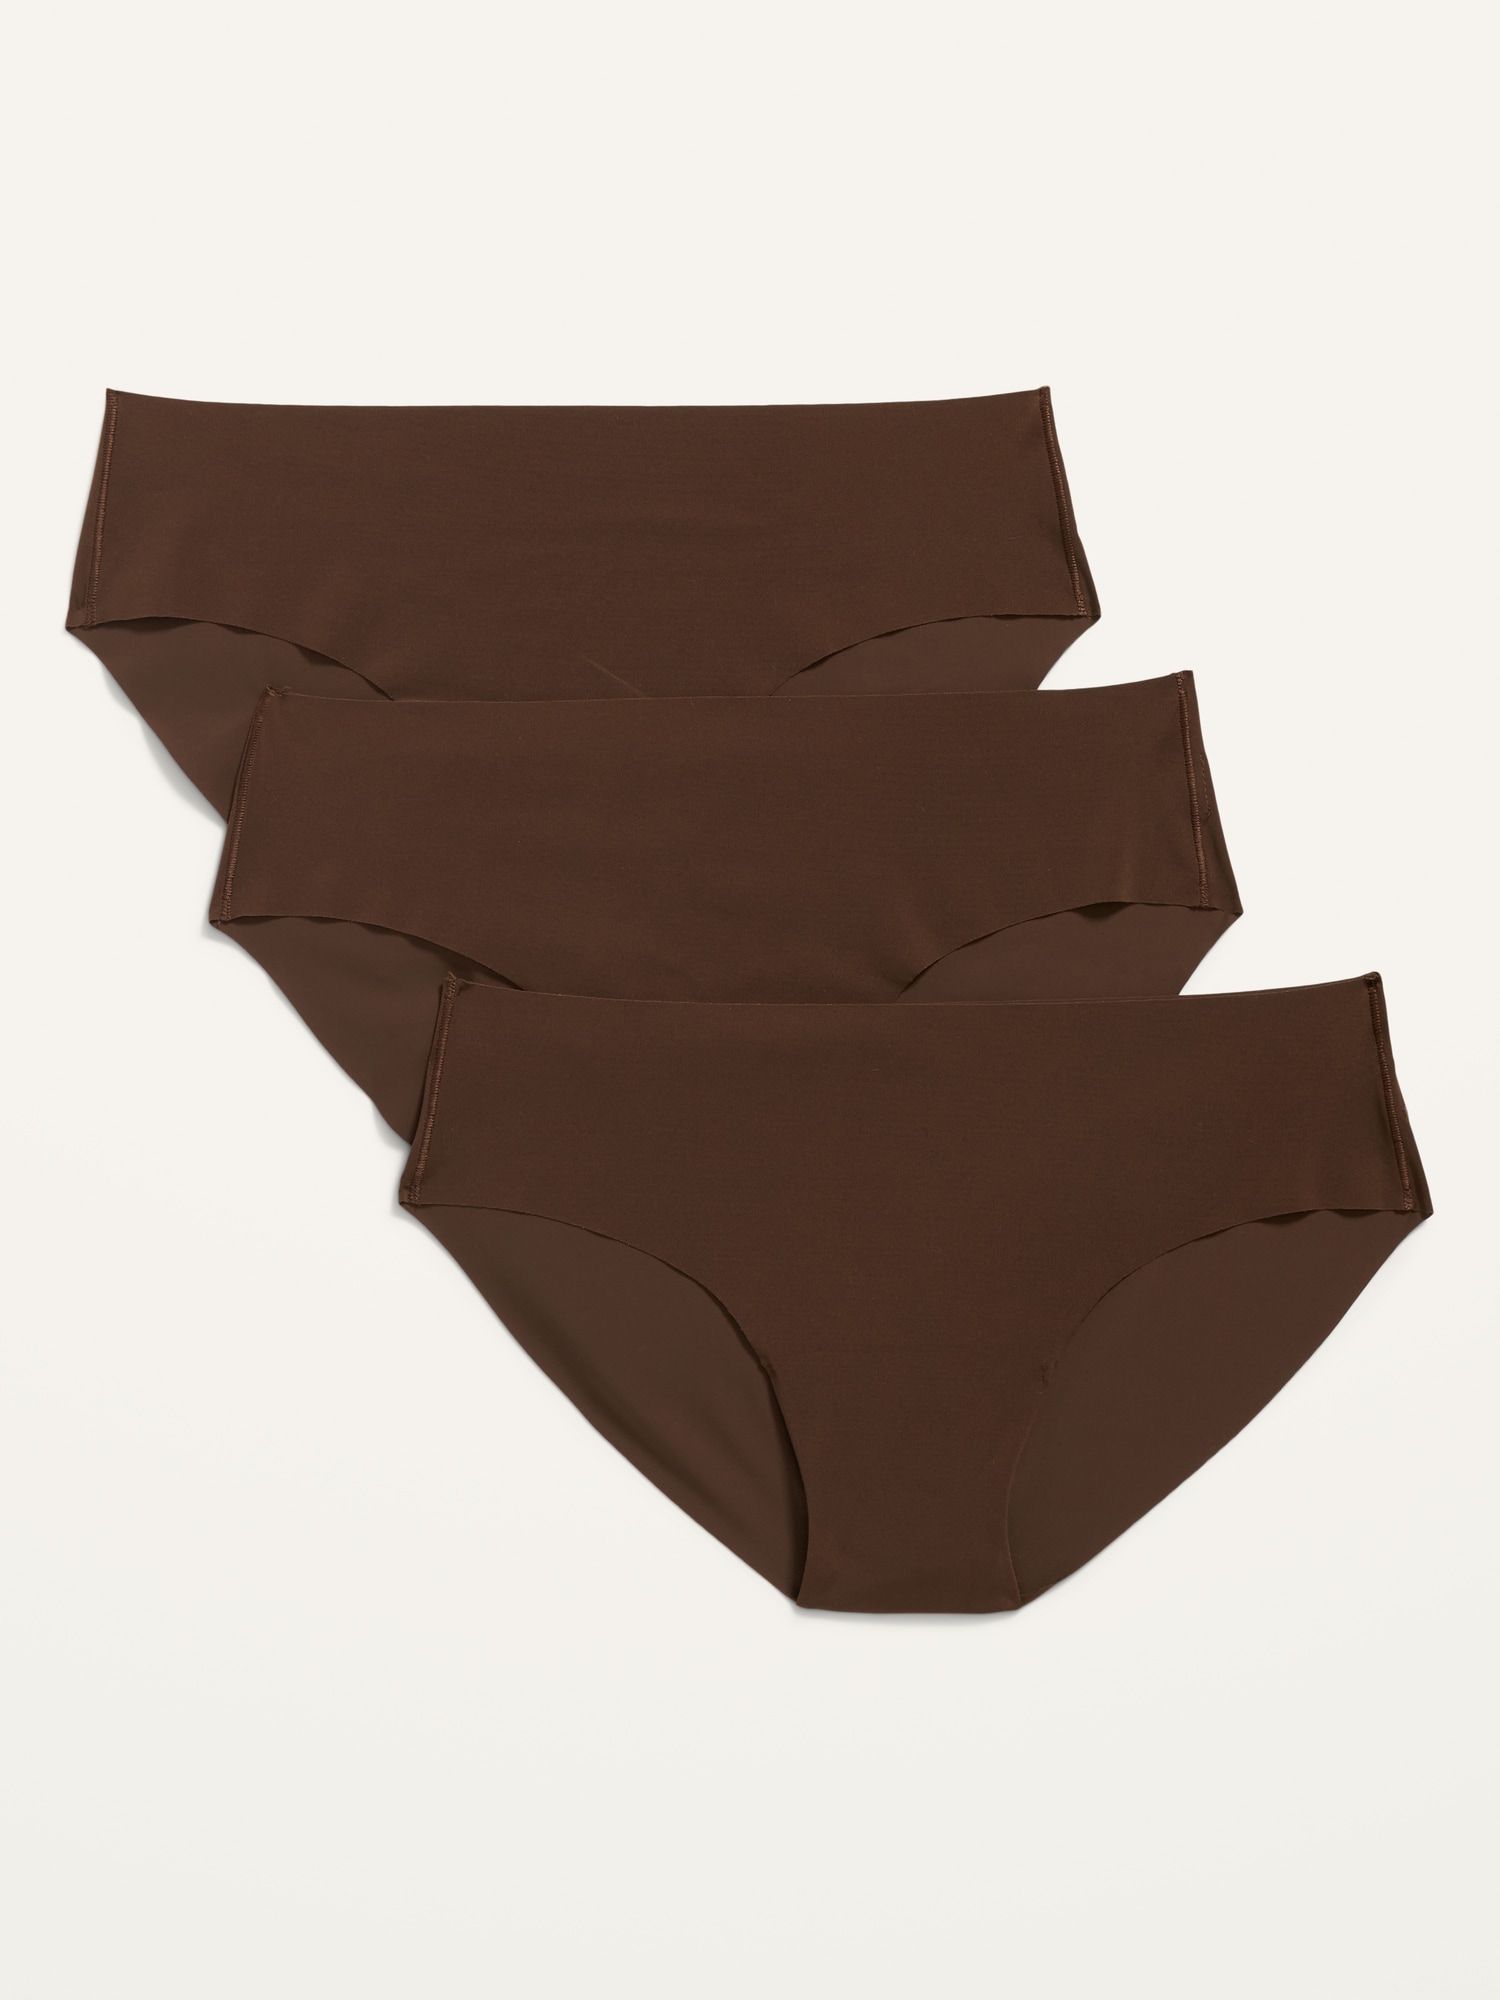 Old Navy Soft-Knit No-Show Hipster Underwear for Women 3-Pack brown. 1